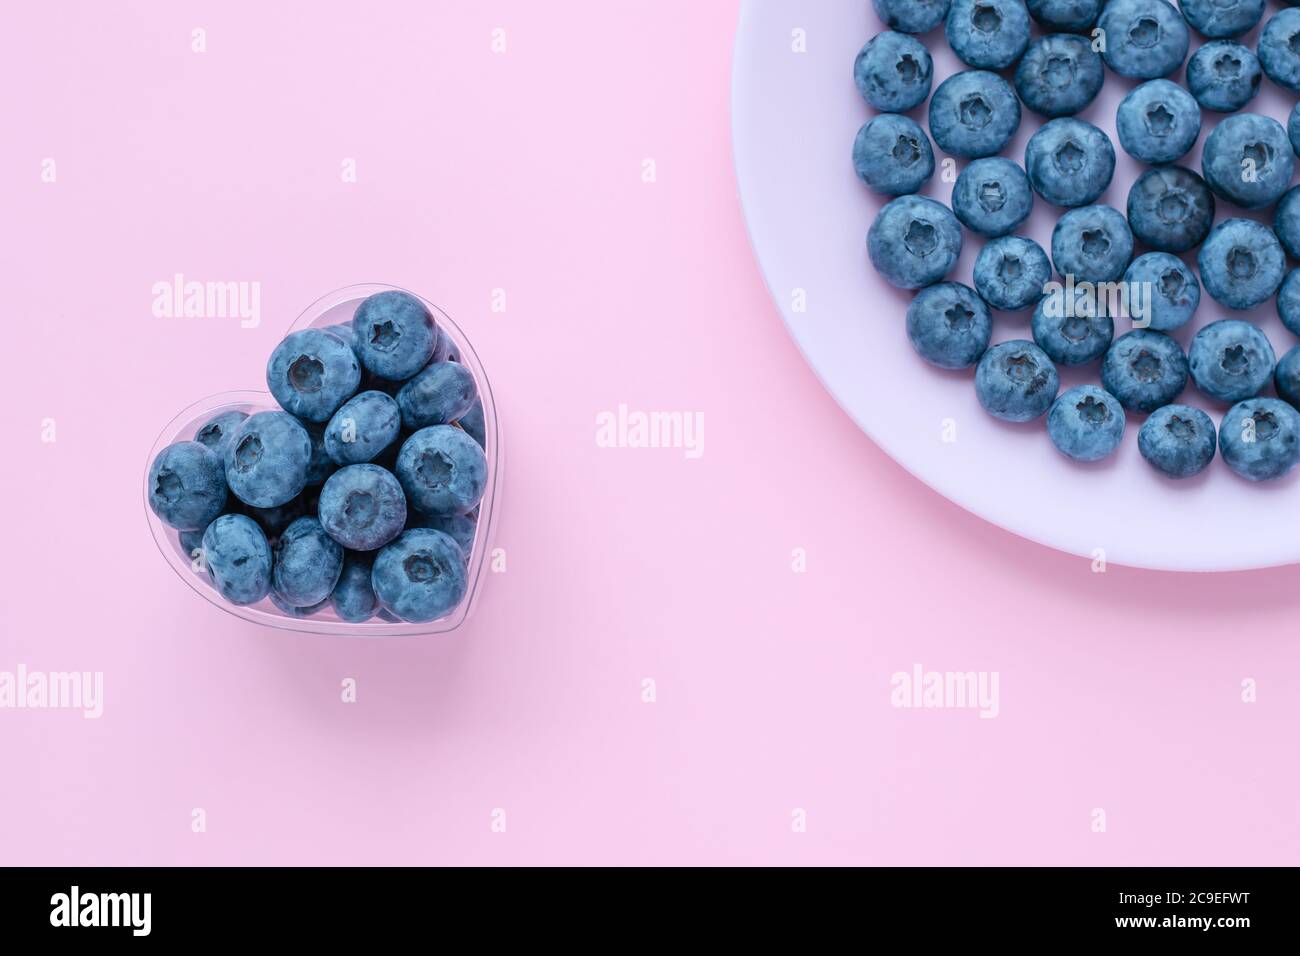 Blueberries in a heart shaped bowl, berry on a pink plate, dish. Abstract backgrounds, bright summer wallpaper. Selective focus Stock Photo